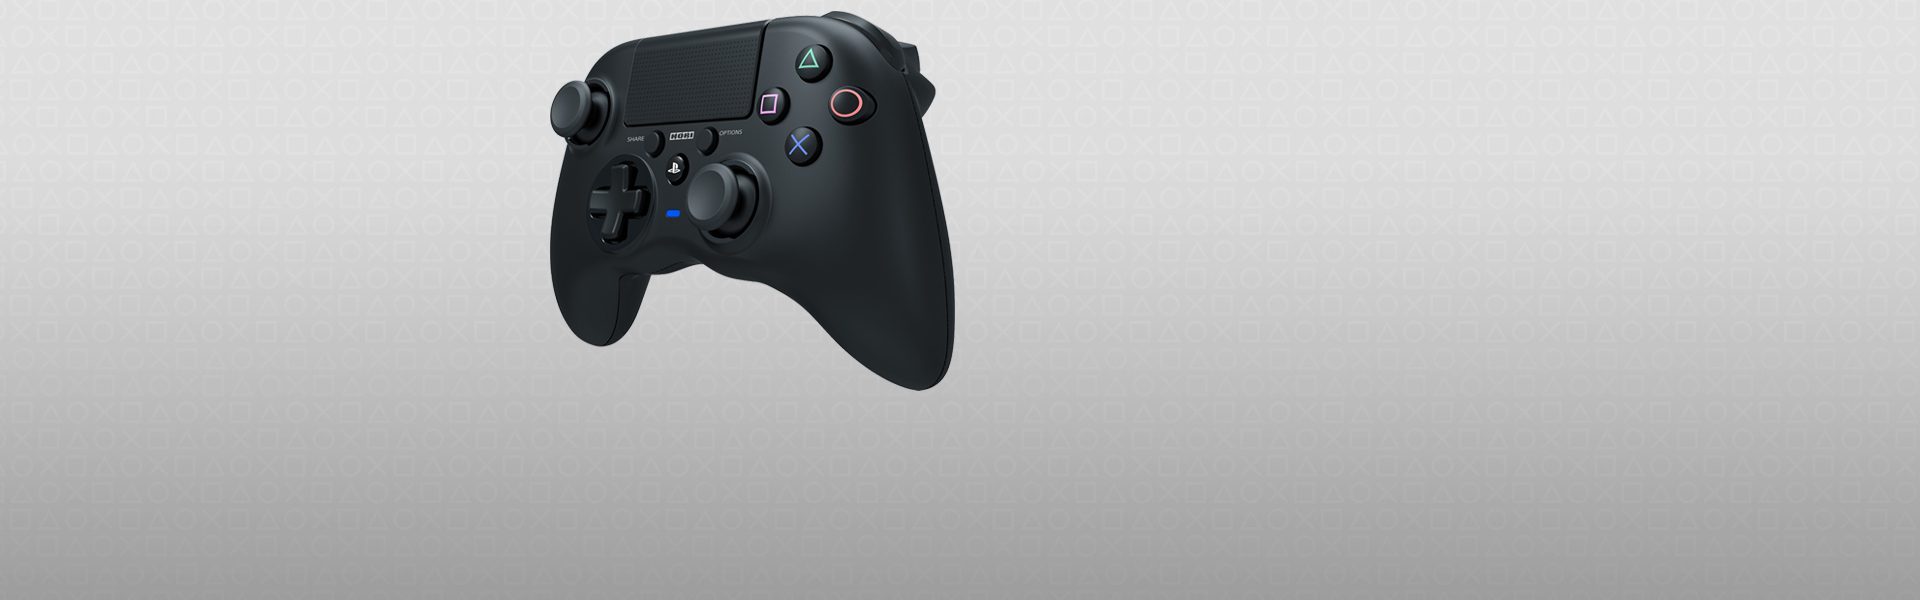 onyx wireless ps4 controller